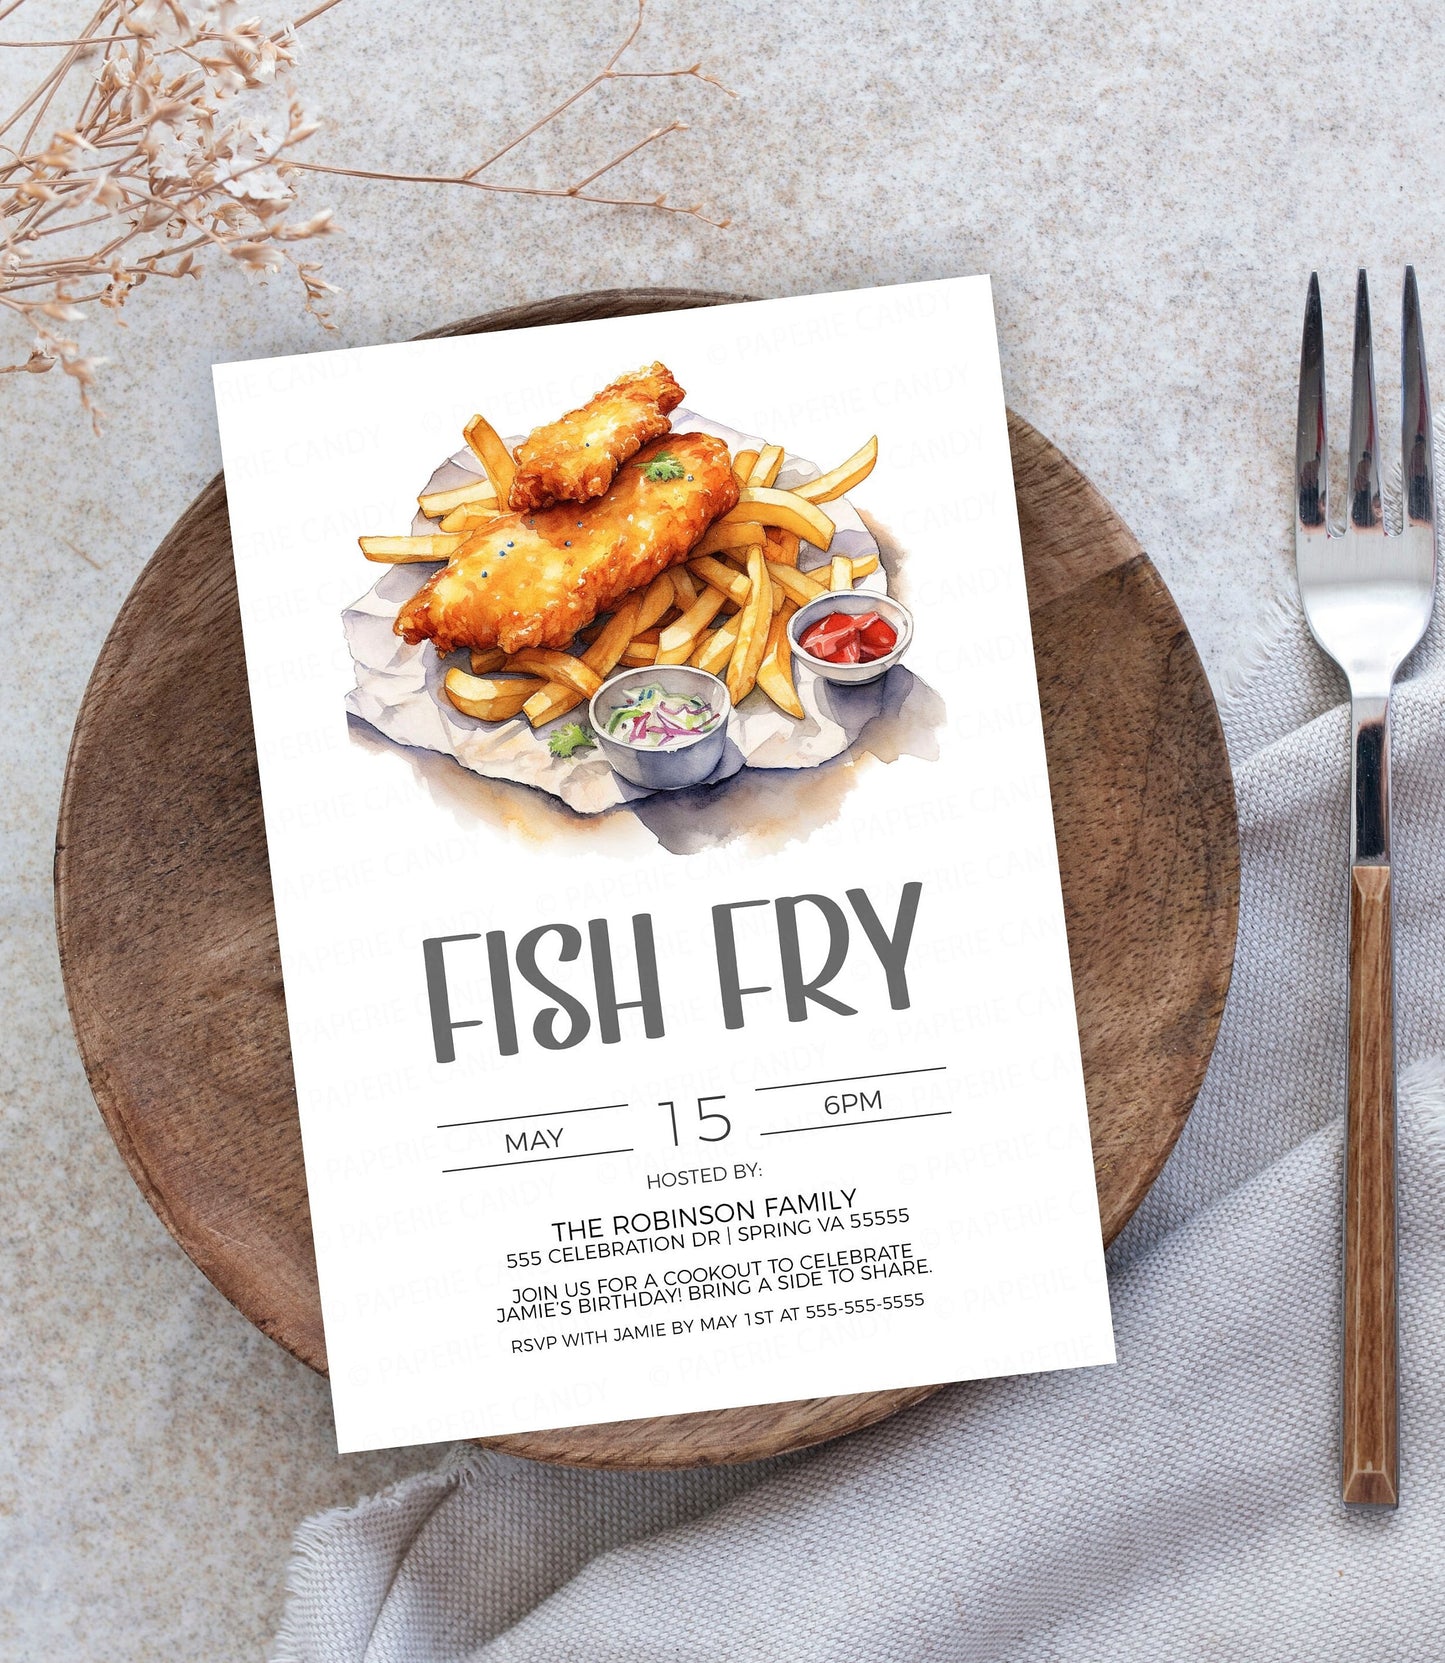 Fish Fry Invitation, Fish And Chips Invite, Seafood Birthday Party, Fish Fry Flyer, Fish Fry Competition, Printable Template Fundraiser